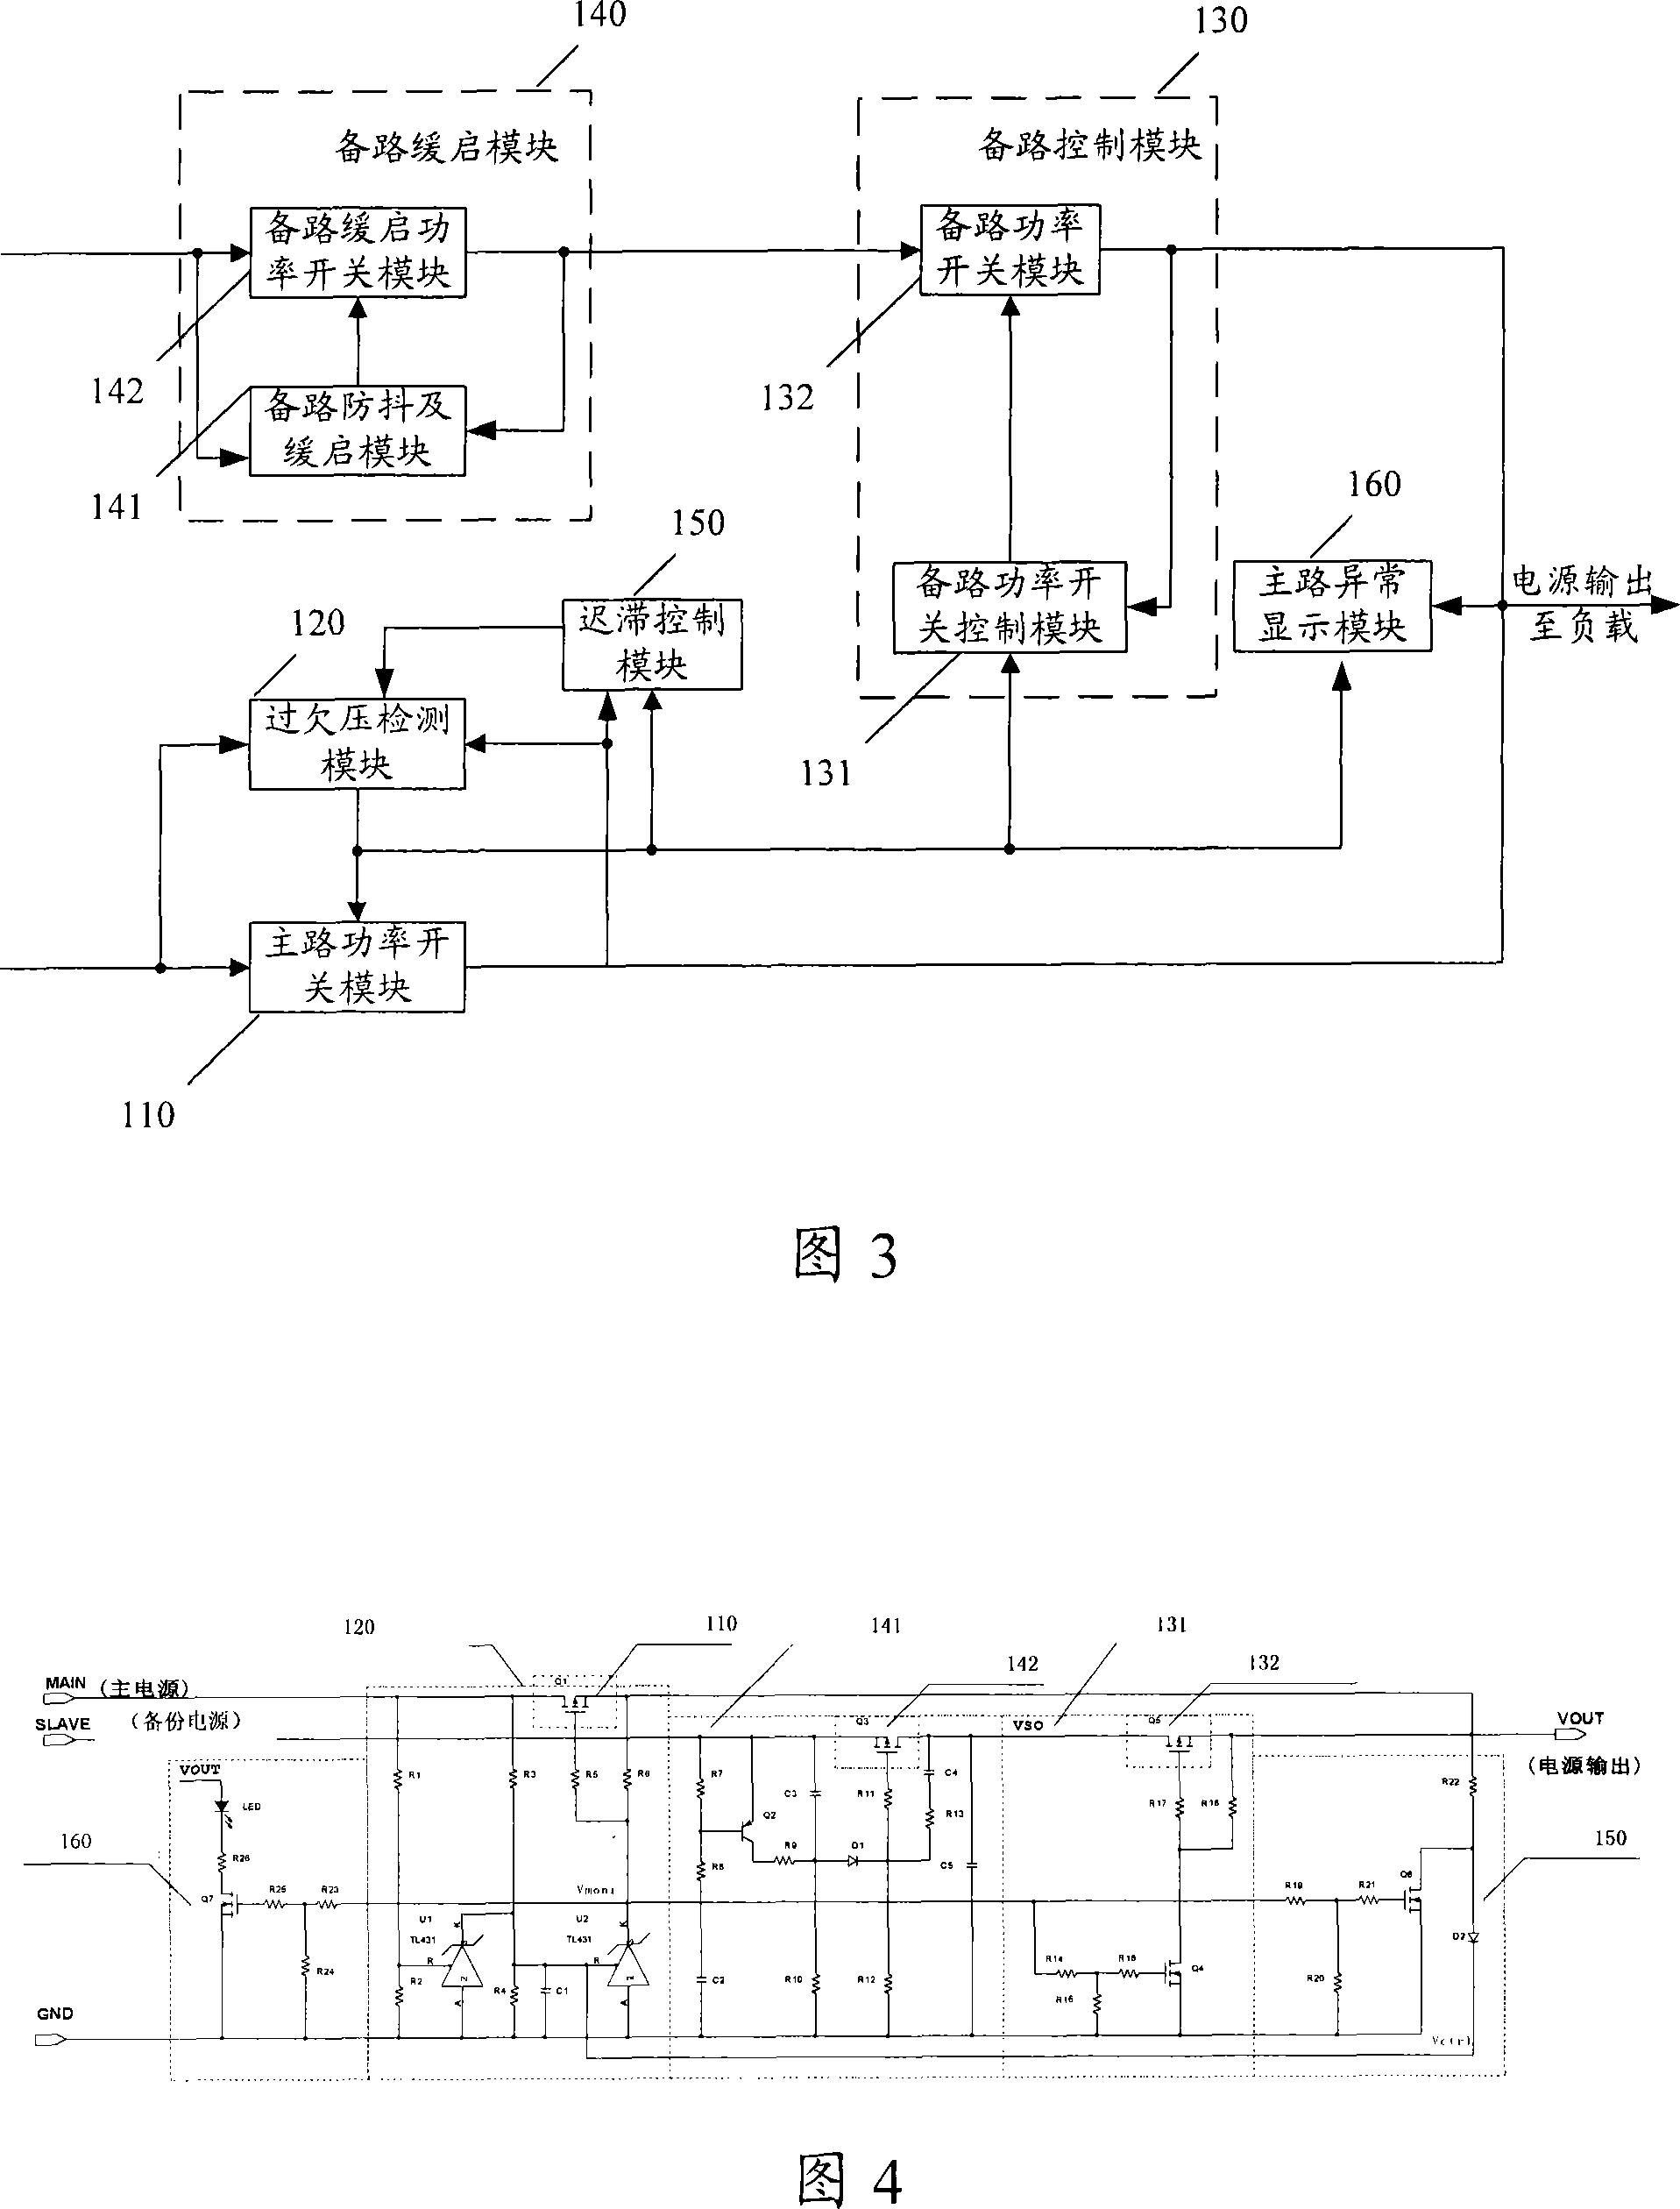 Method and apparatus for controlling and switching main and backup power